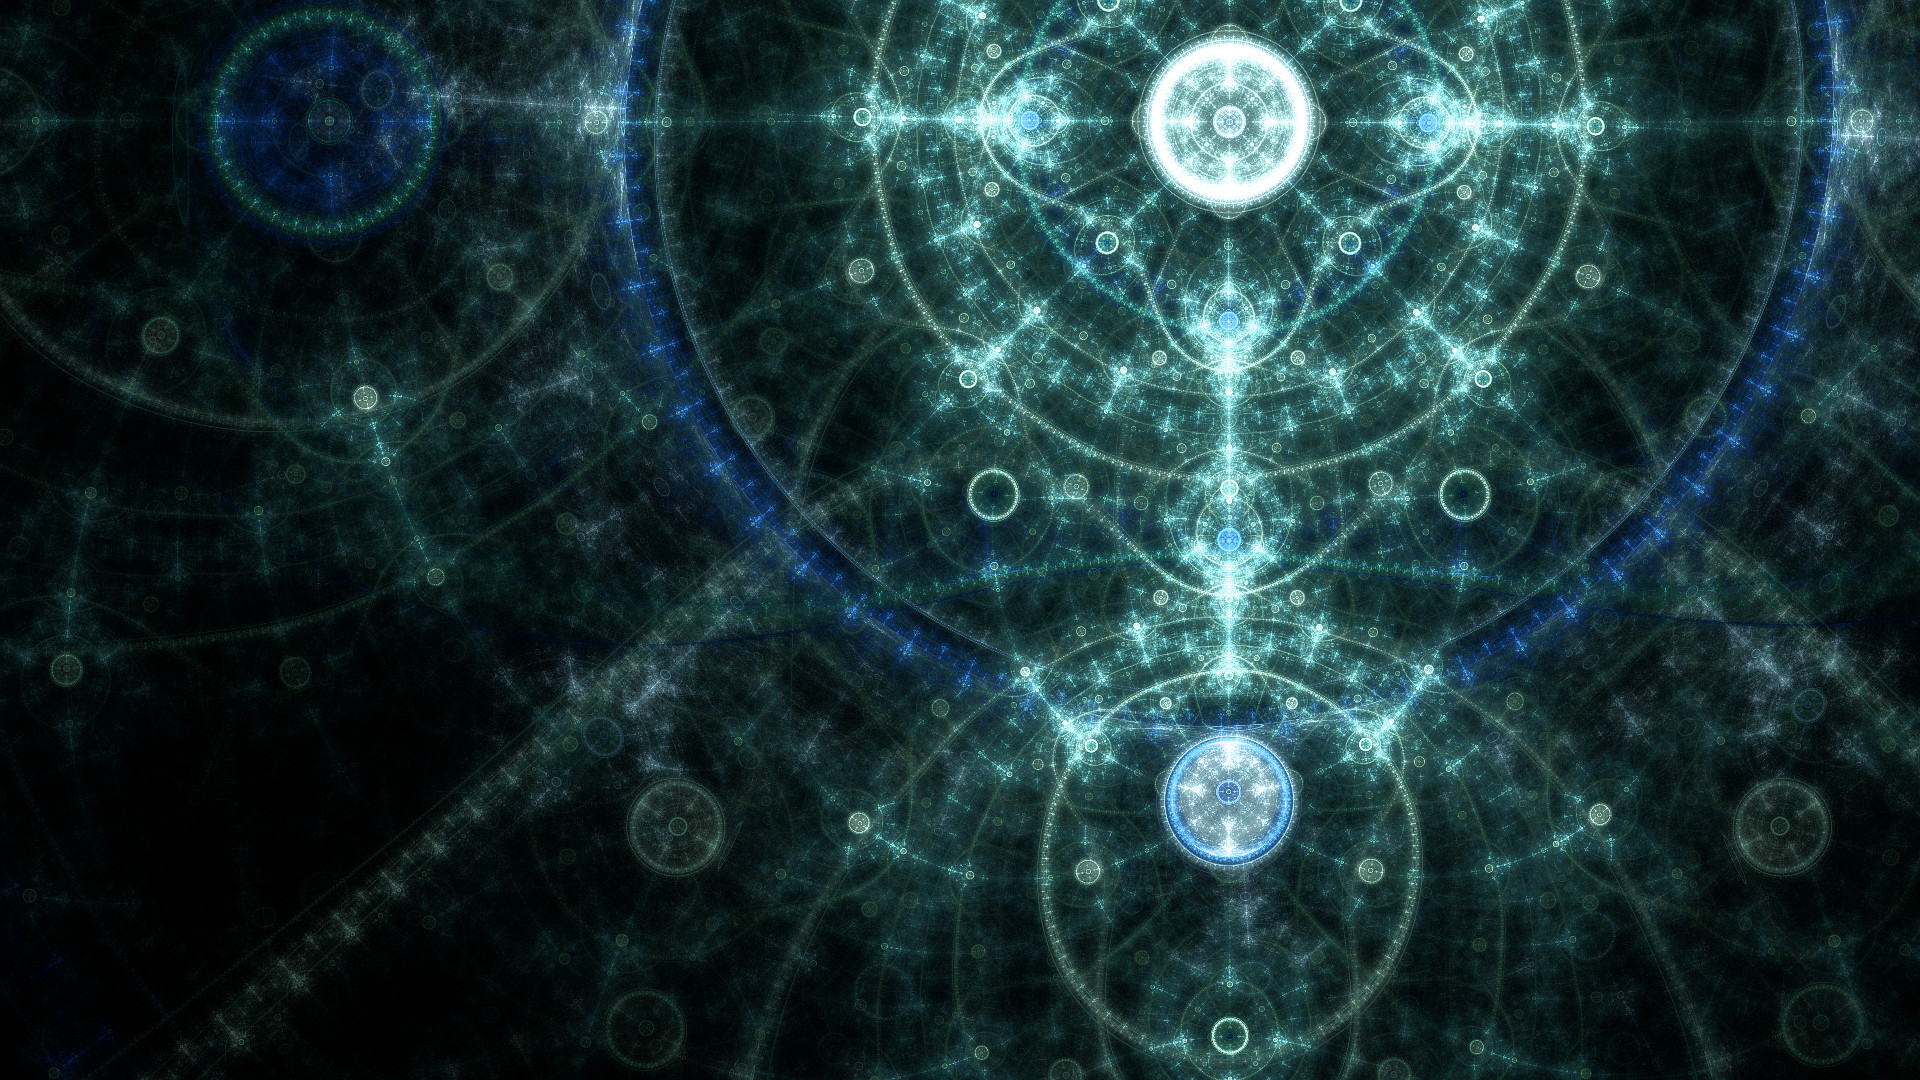 1920x1080 ... Wallpapers Straddle the Line Between Math and Art with These Fractal .